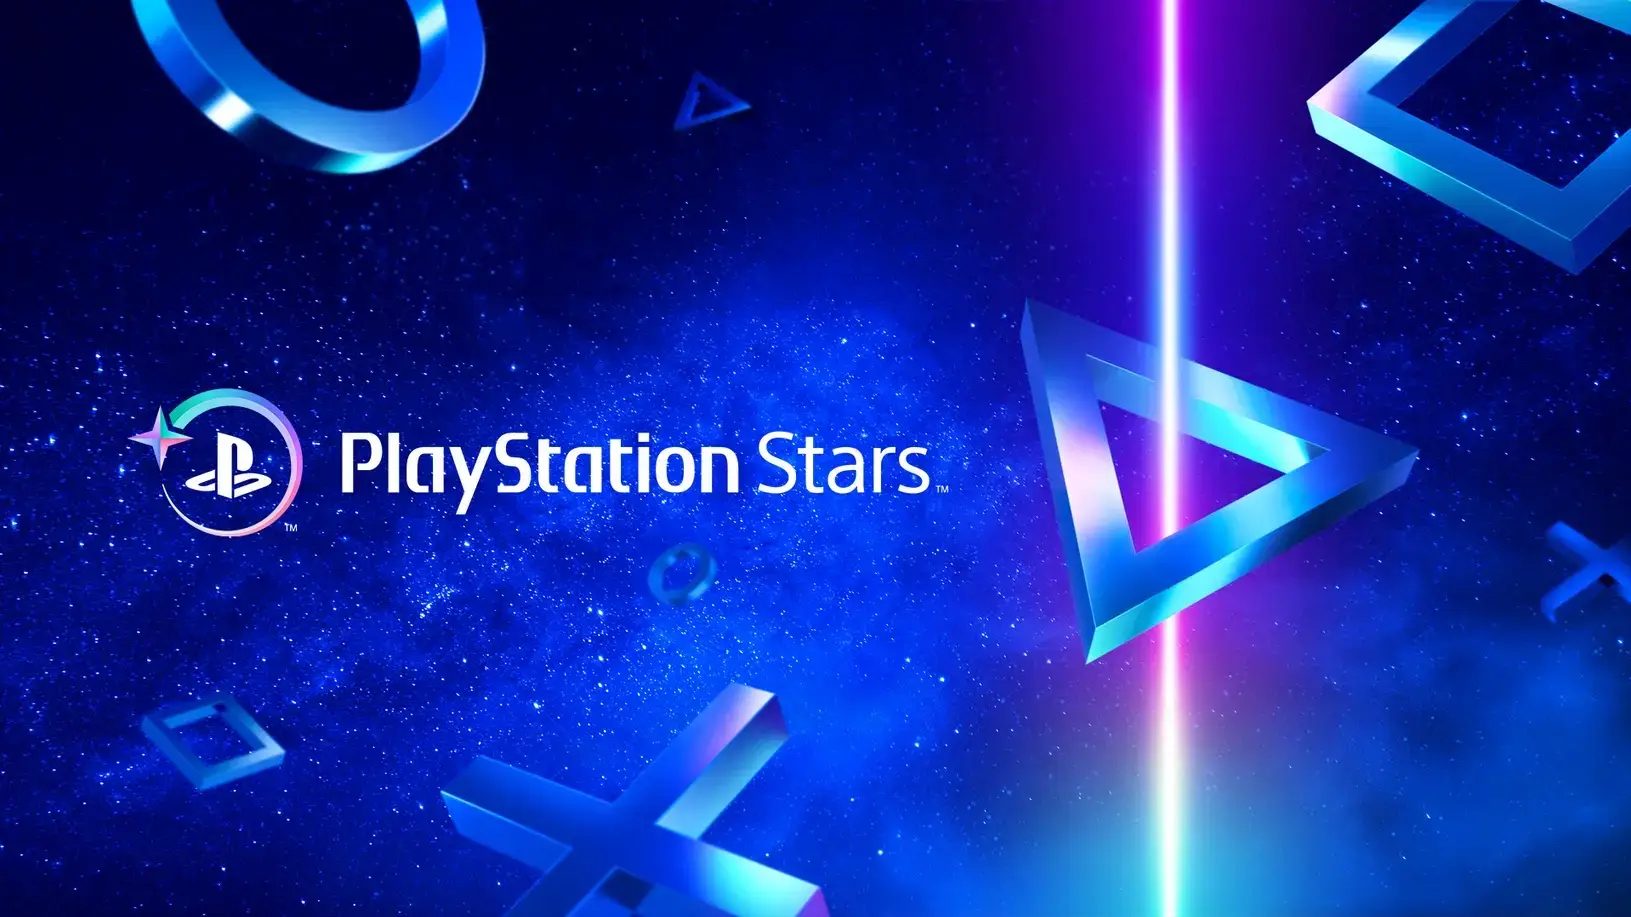 PlayStation Showcase to be Held in September Says Latest Rumor - PlayStation  LifeStyle